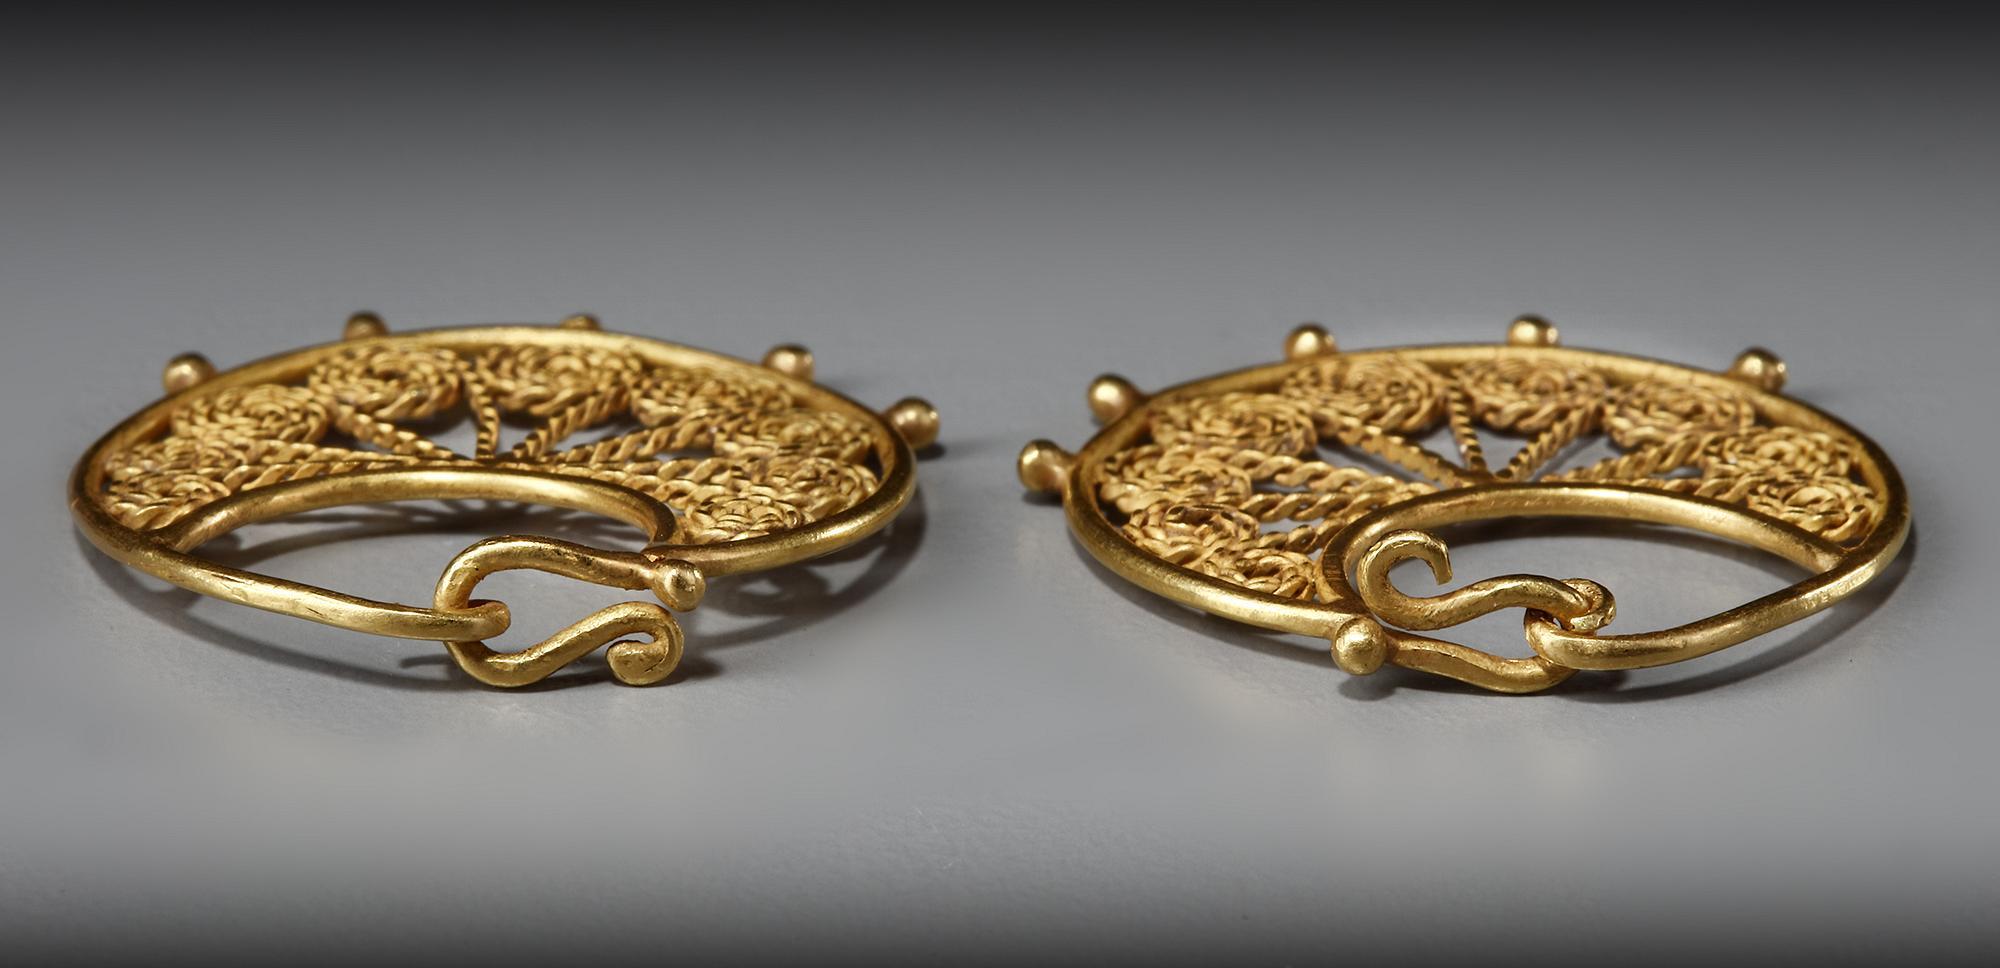 A PAIR OF BYZANTINE GOLD EARRINGS, CIRCA 8TH-10TH CENTURY A.D. - Image 2 of 3